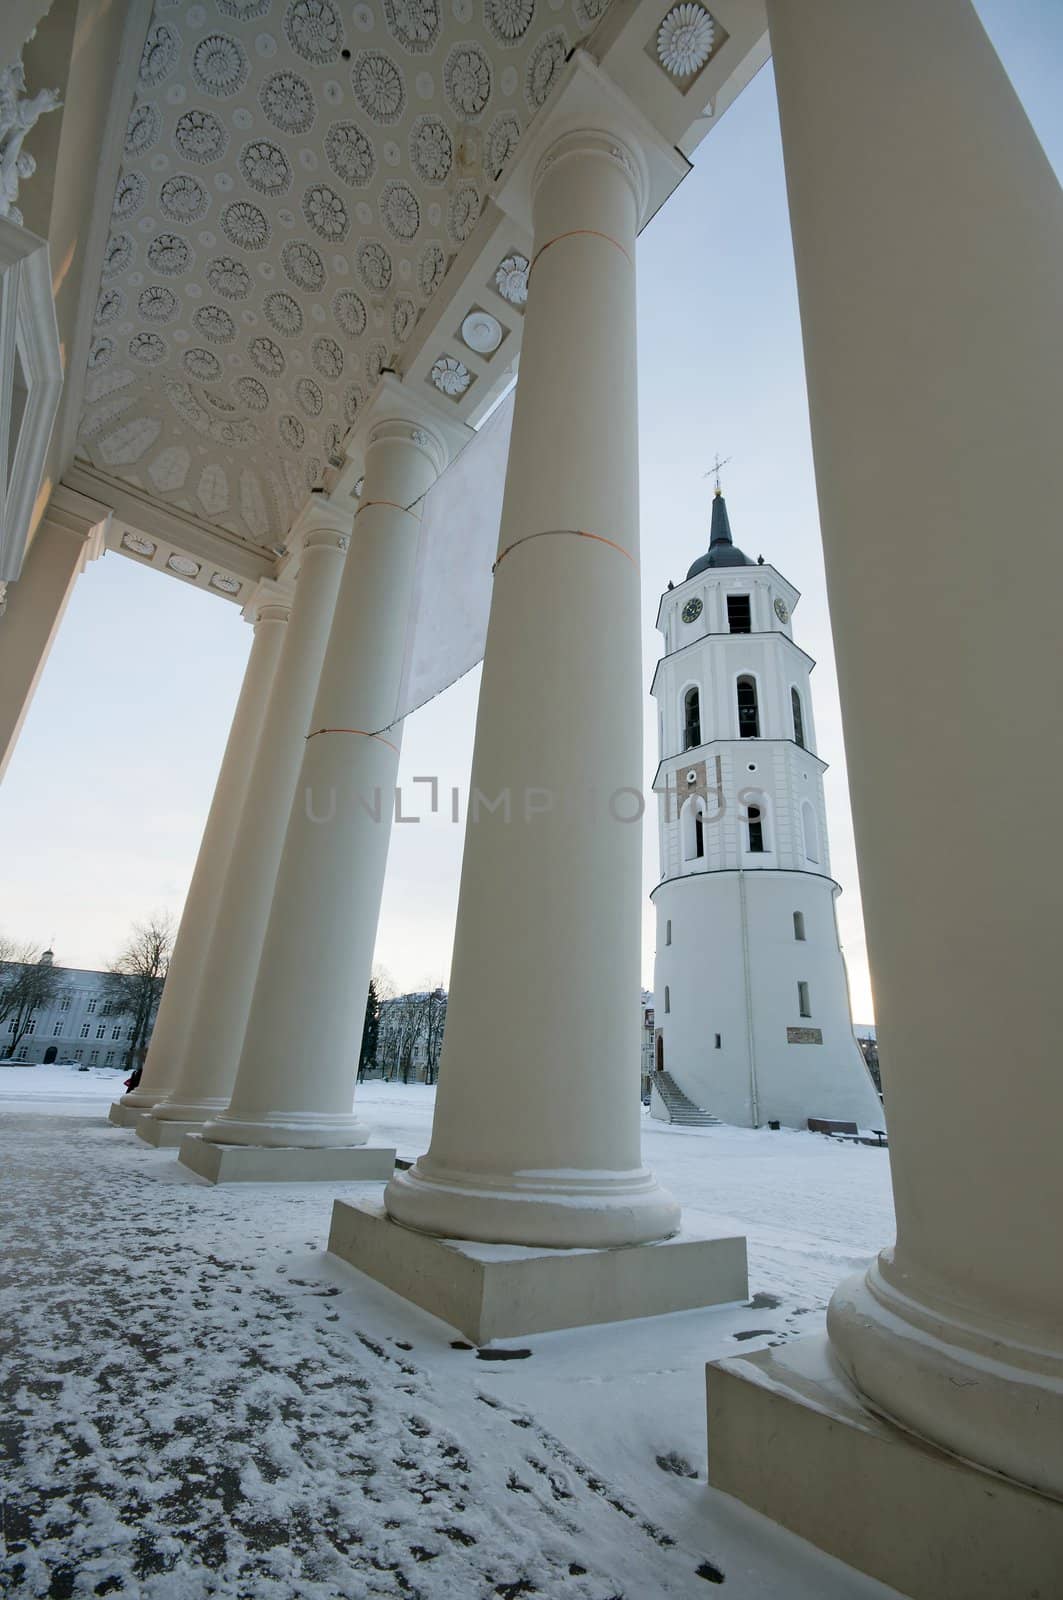 Bell tower in Vilnius, Lithuania by johnnychaos